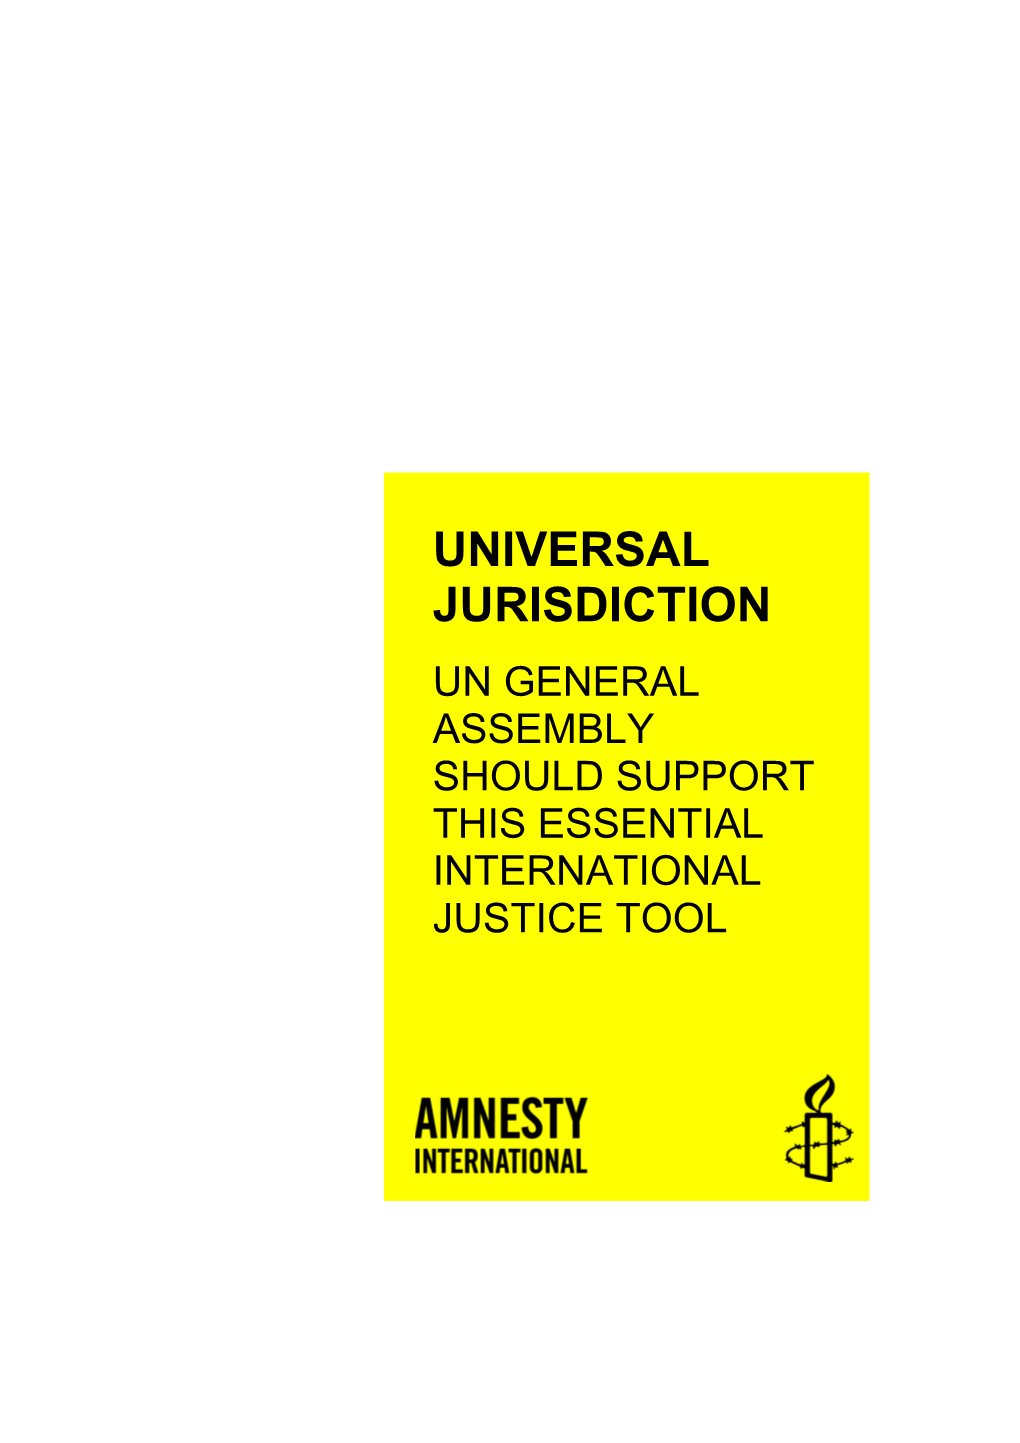 Universal Jurisdiction: UN General Assembly Should Support This